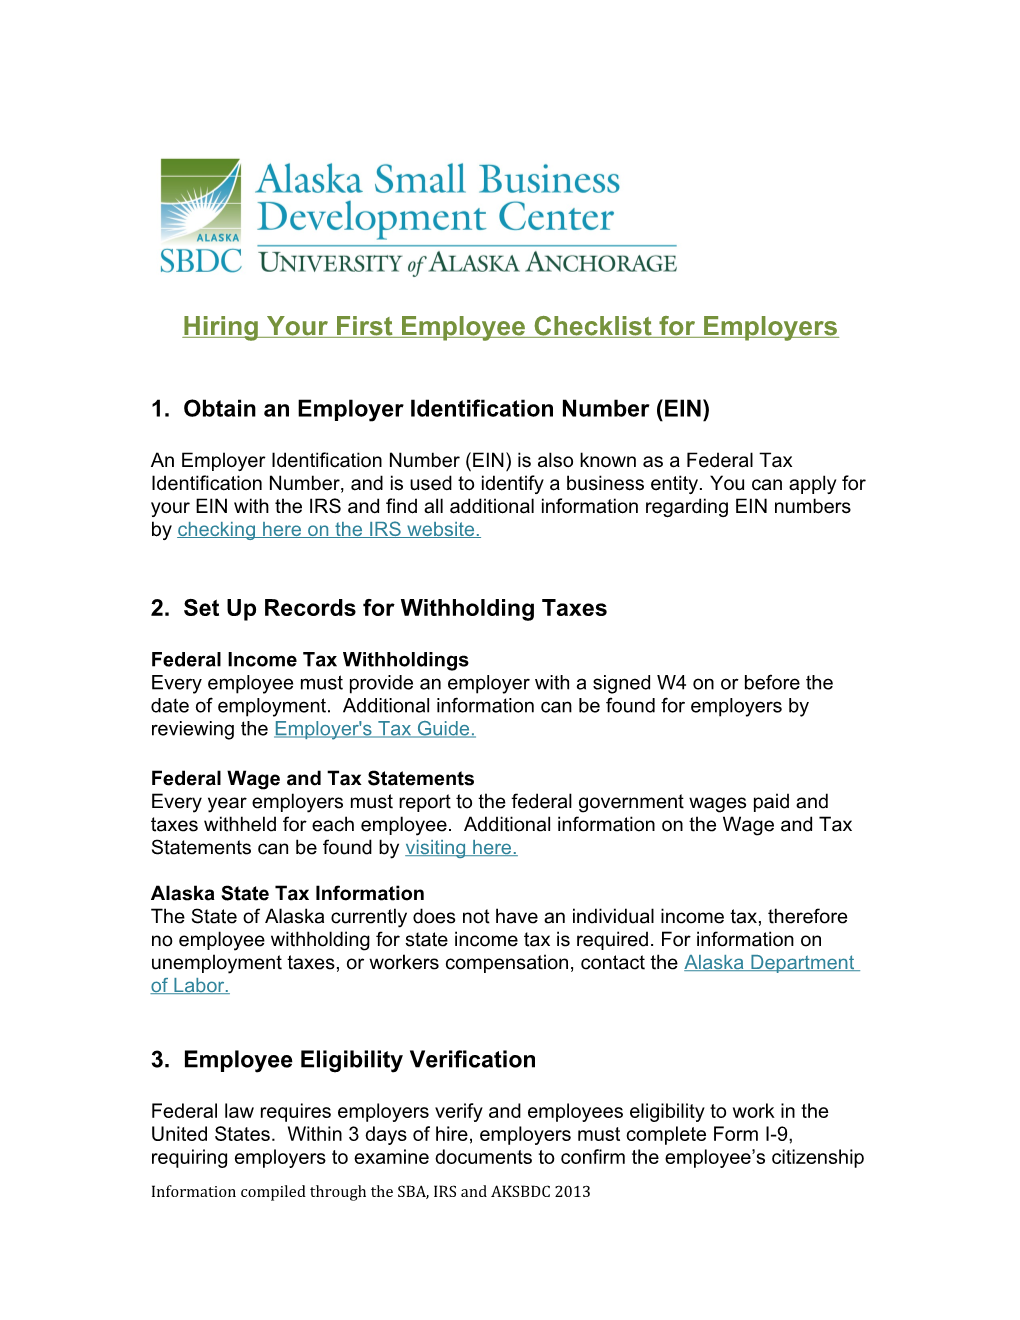 Hiring Your First Employee Checklist for Employers